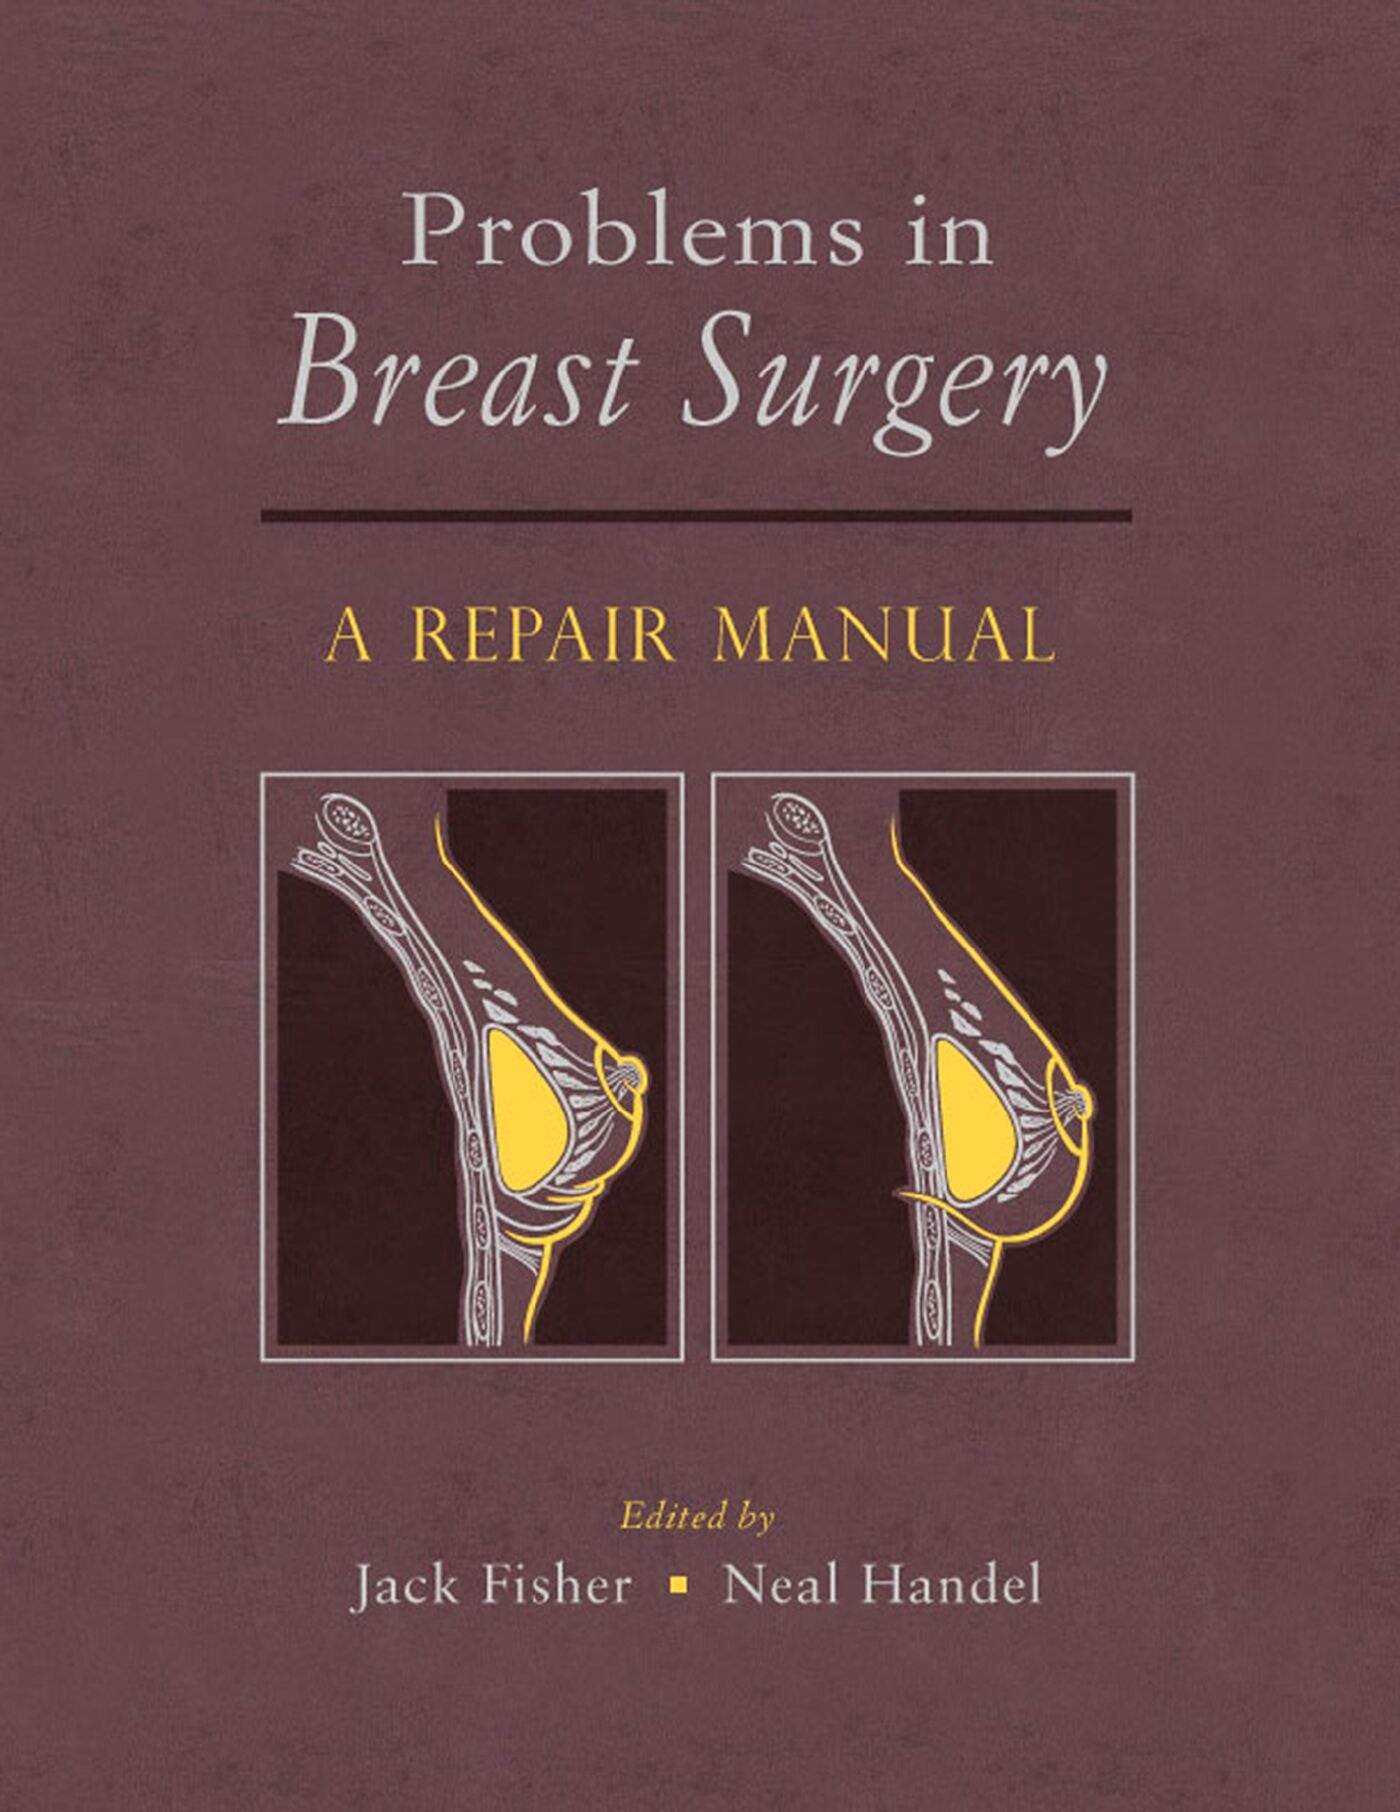 Problems in Breast Surgery, 9781626236875